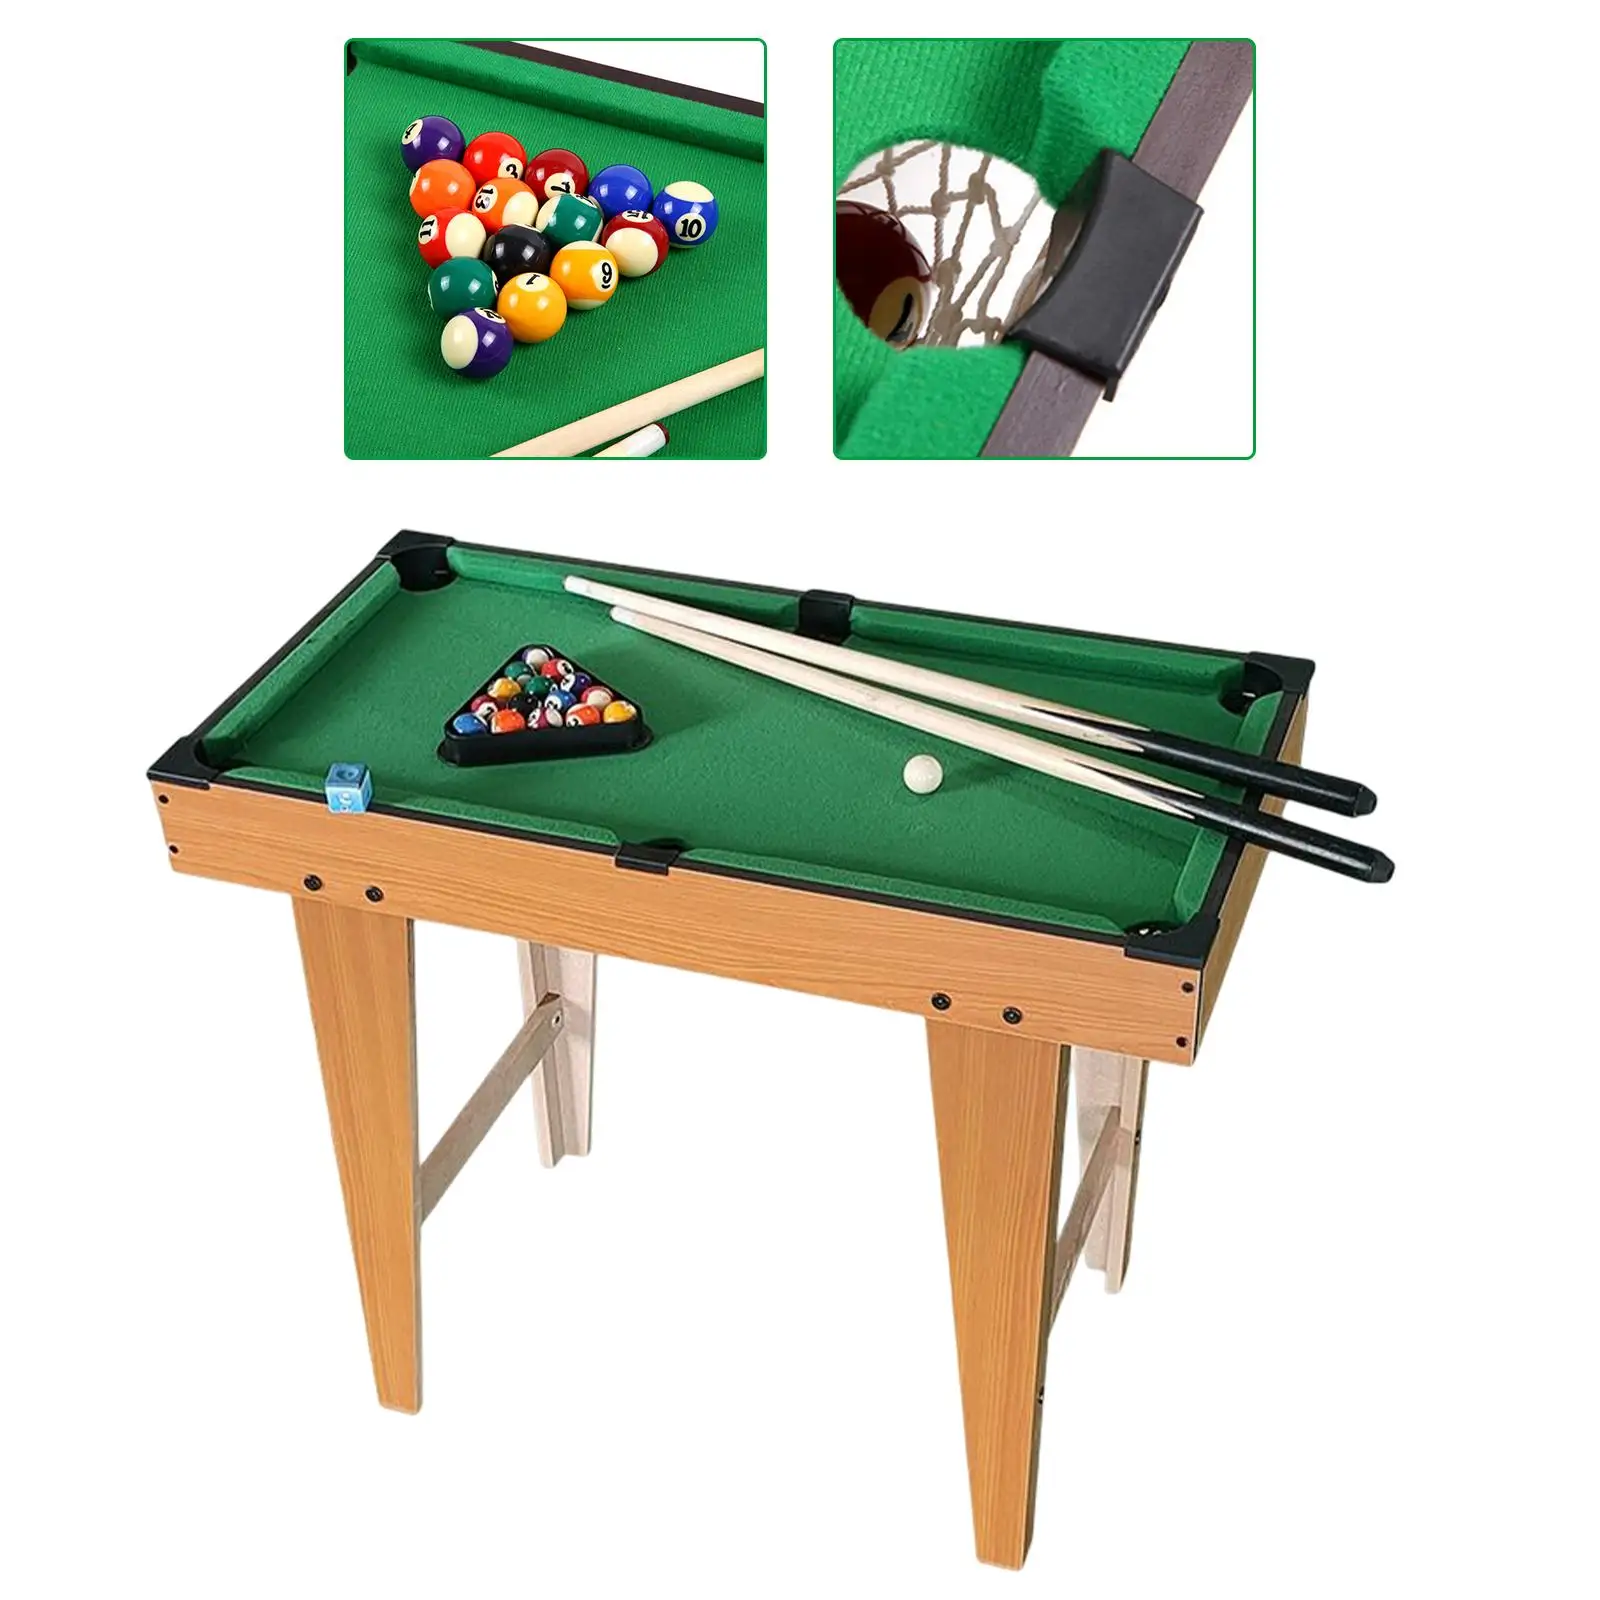 Durable Pool Table Set 15 Colorful Balls, 1 Cue Ball Chalk, Triangle Rack Home Office Use Tabletop Billiards for Family